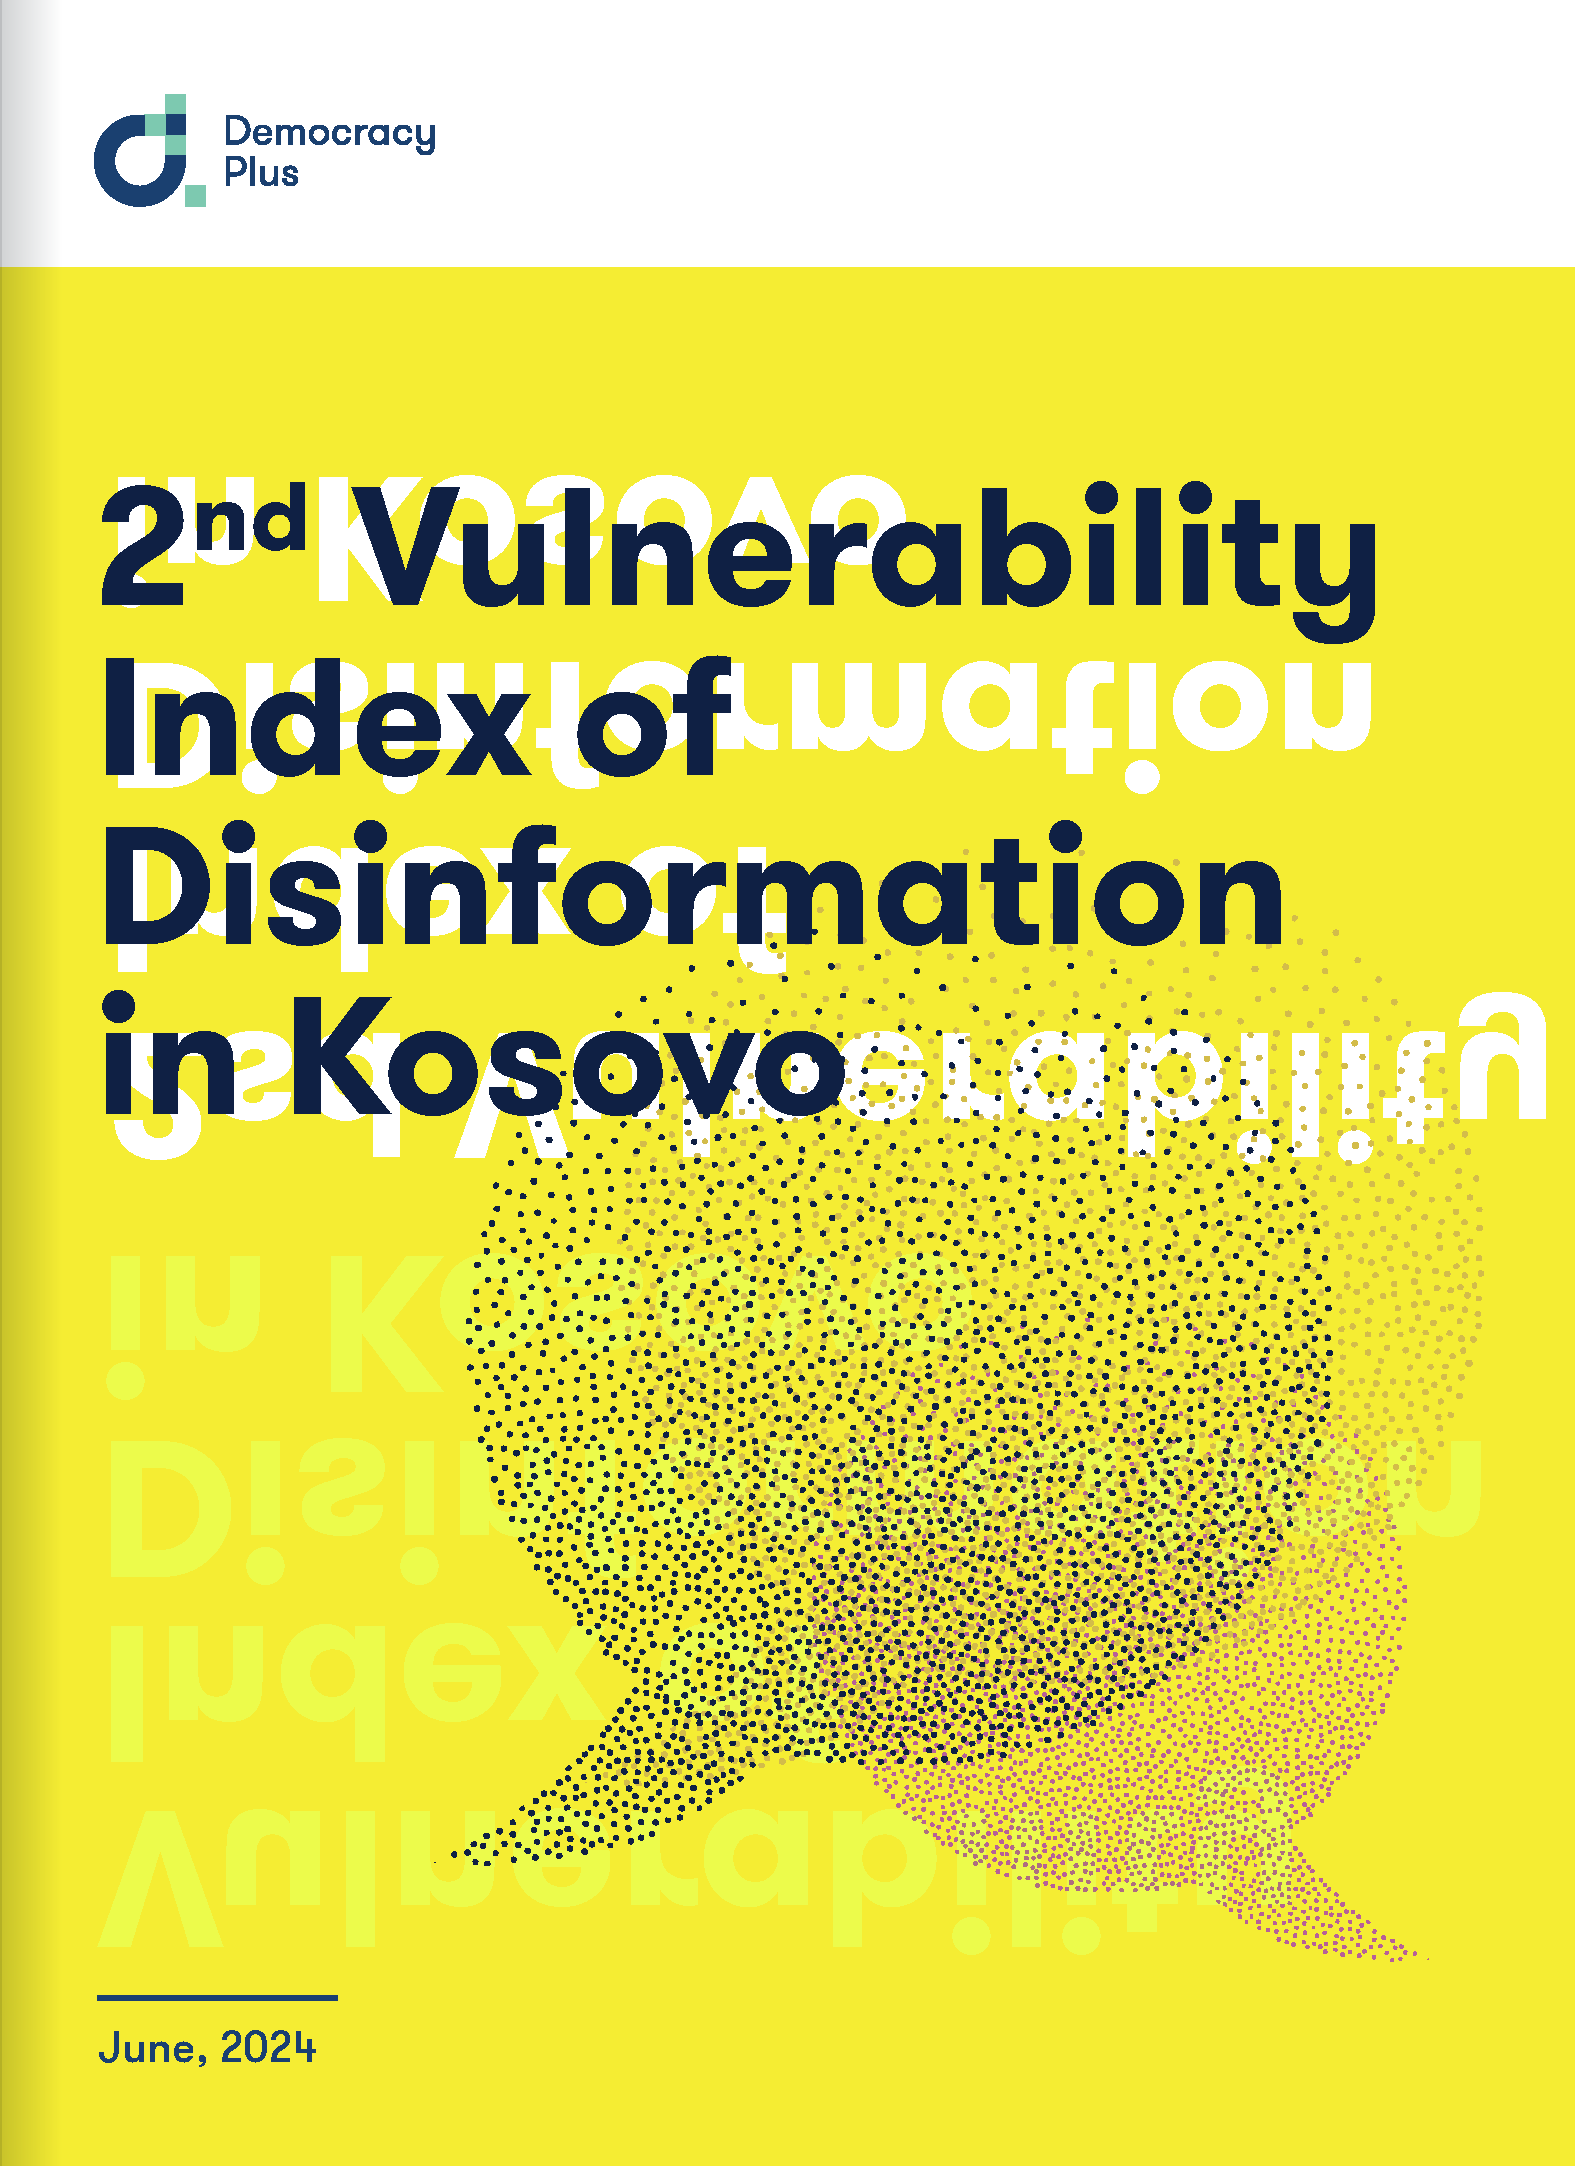 2nd Vulnerability Index of Disinformation in Kosovo